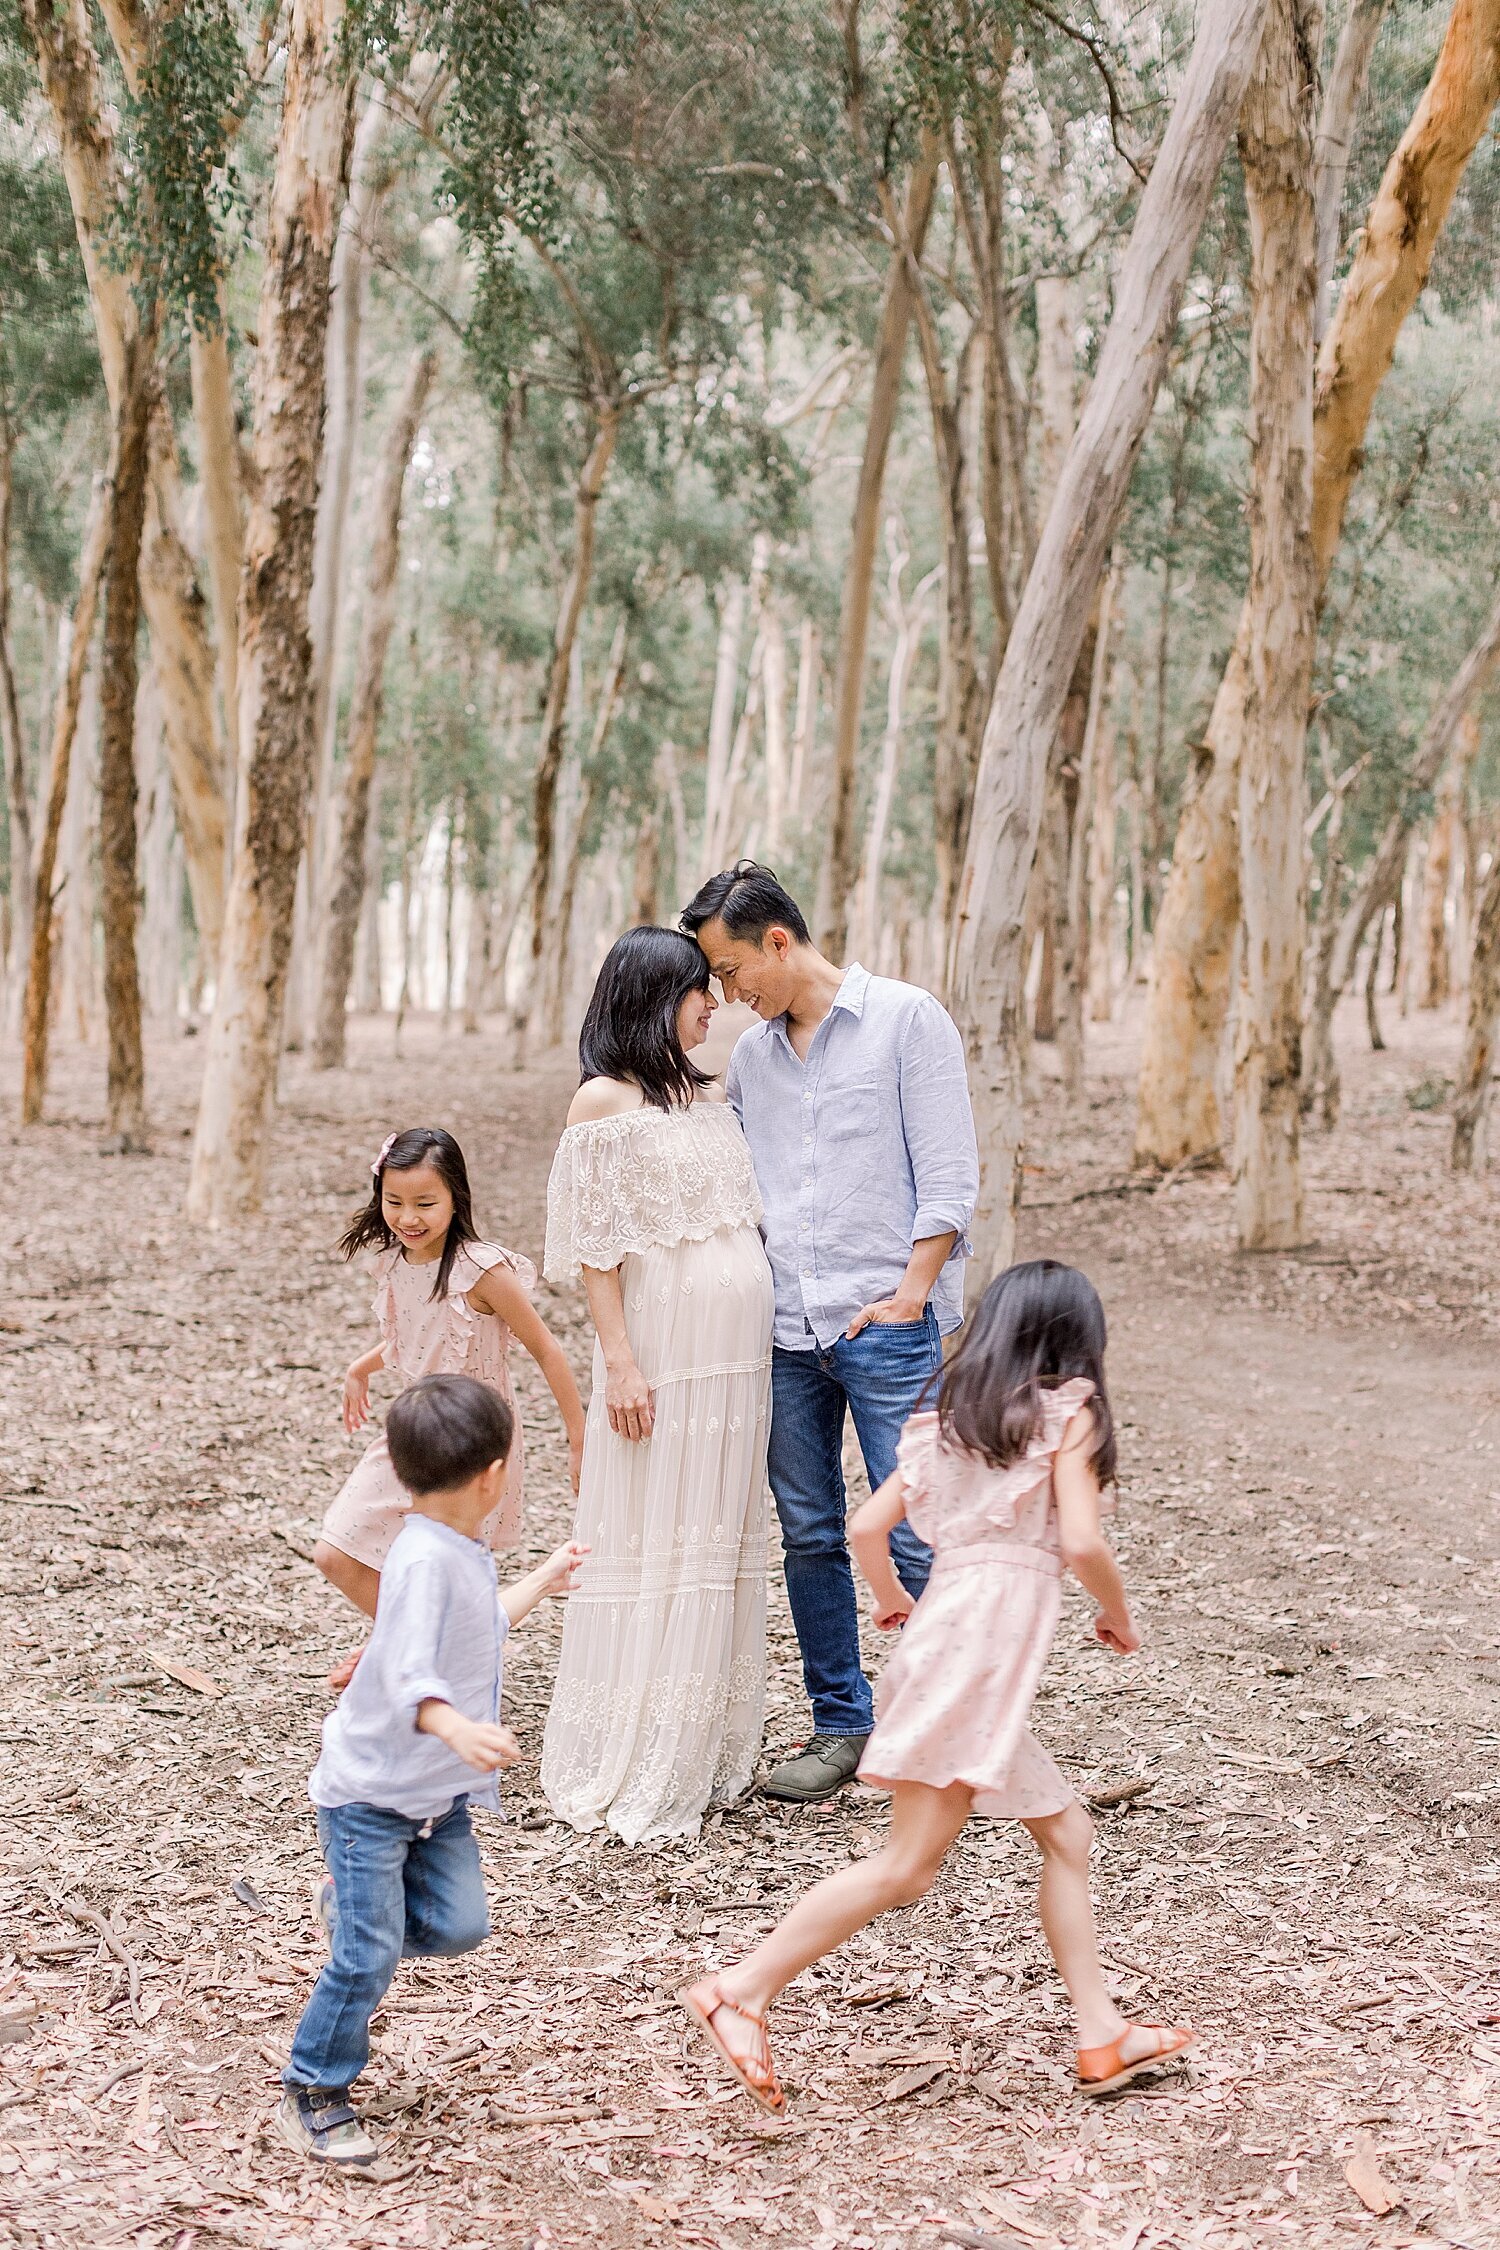 Kids running around their parents during maternity photoshoot. Photo by Ambre Williams Photography.